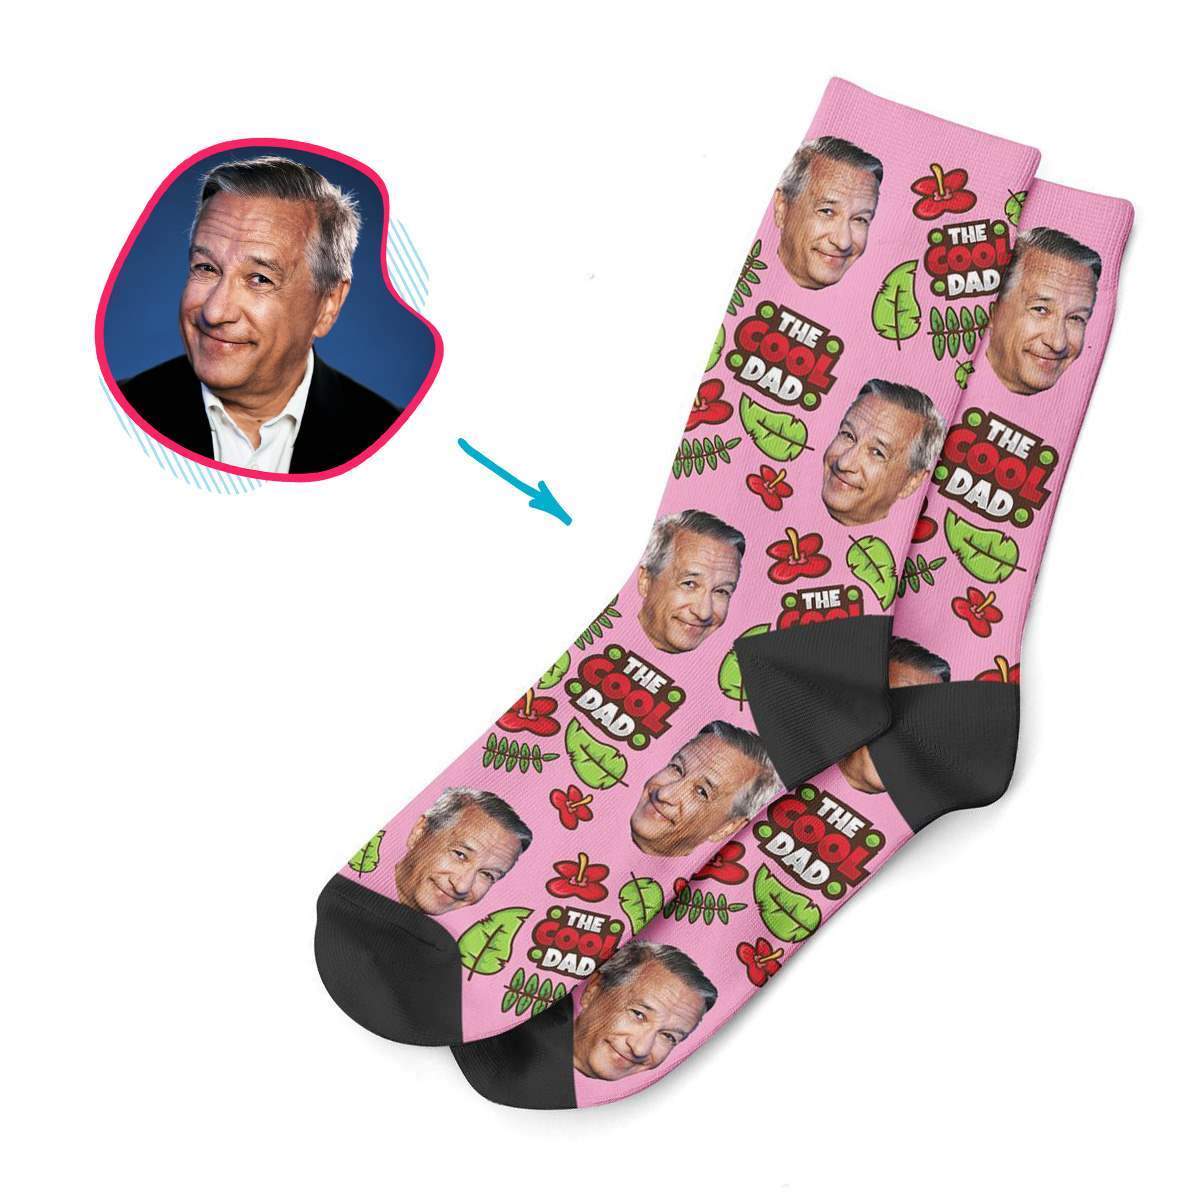 The Cool Dad Personalized Socks